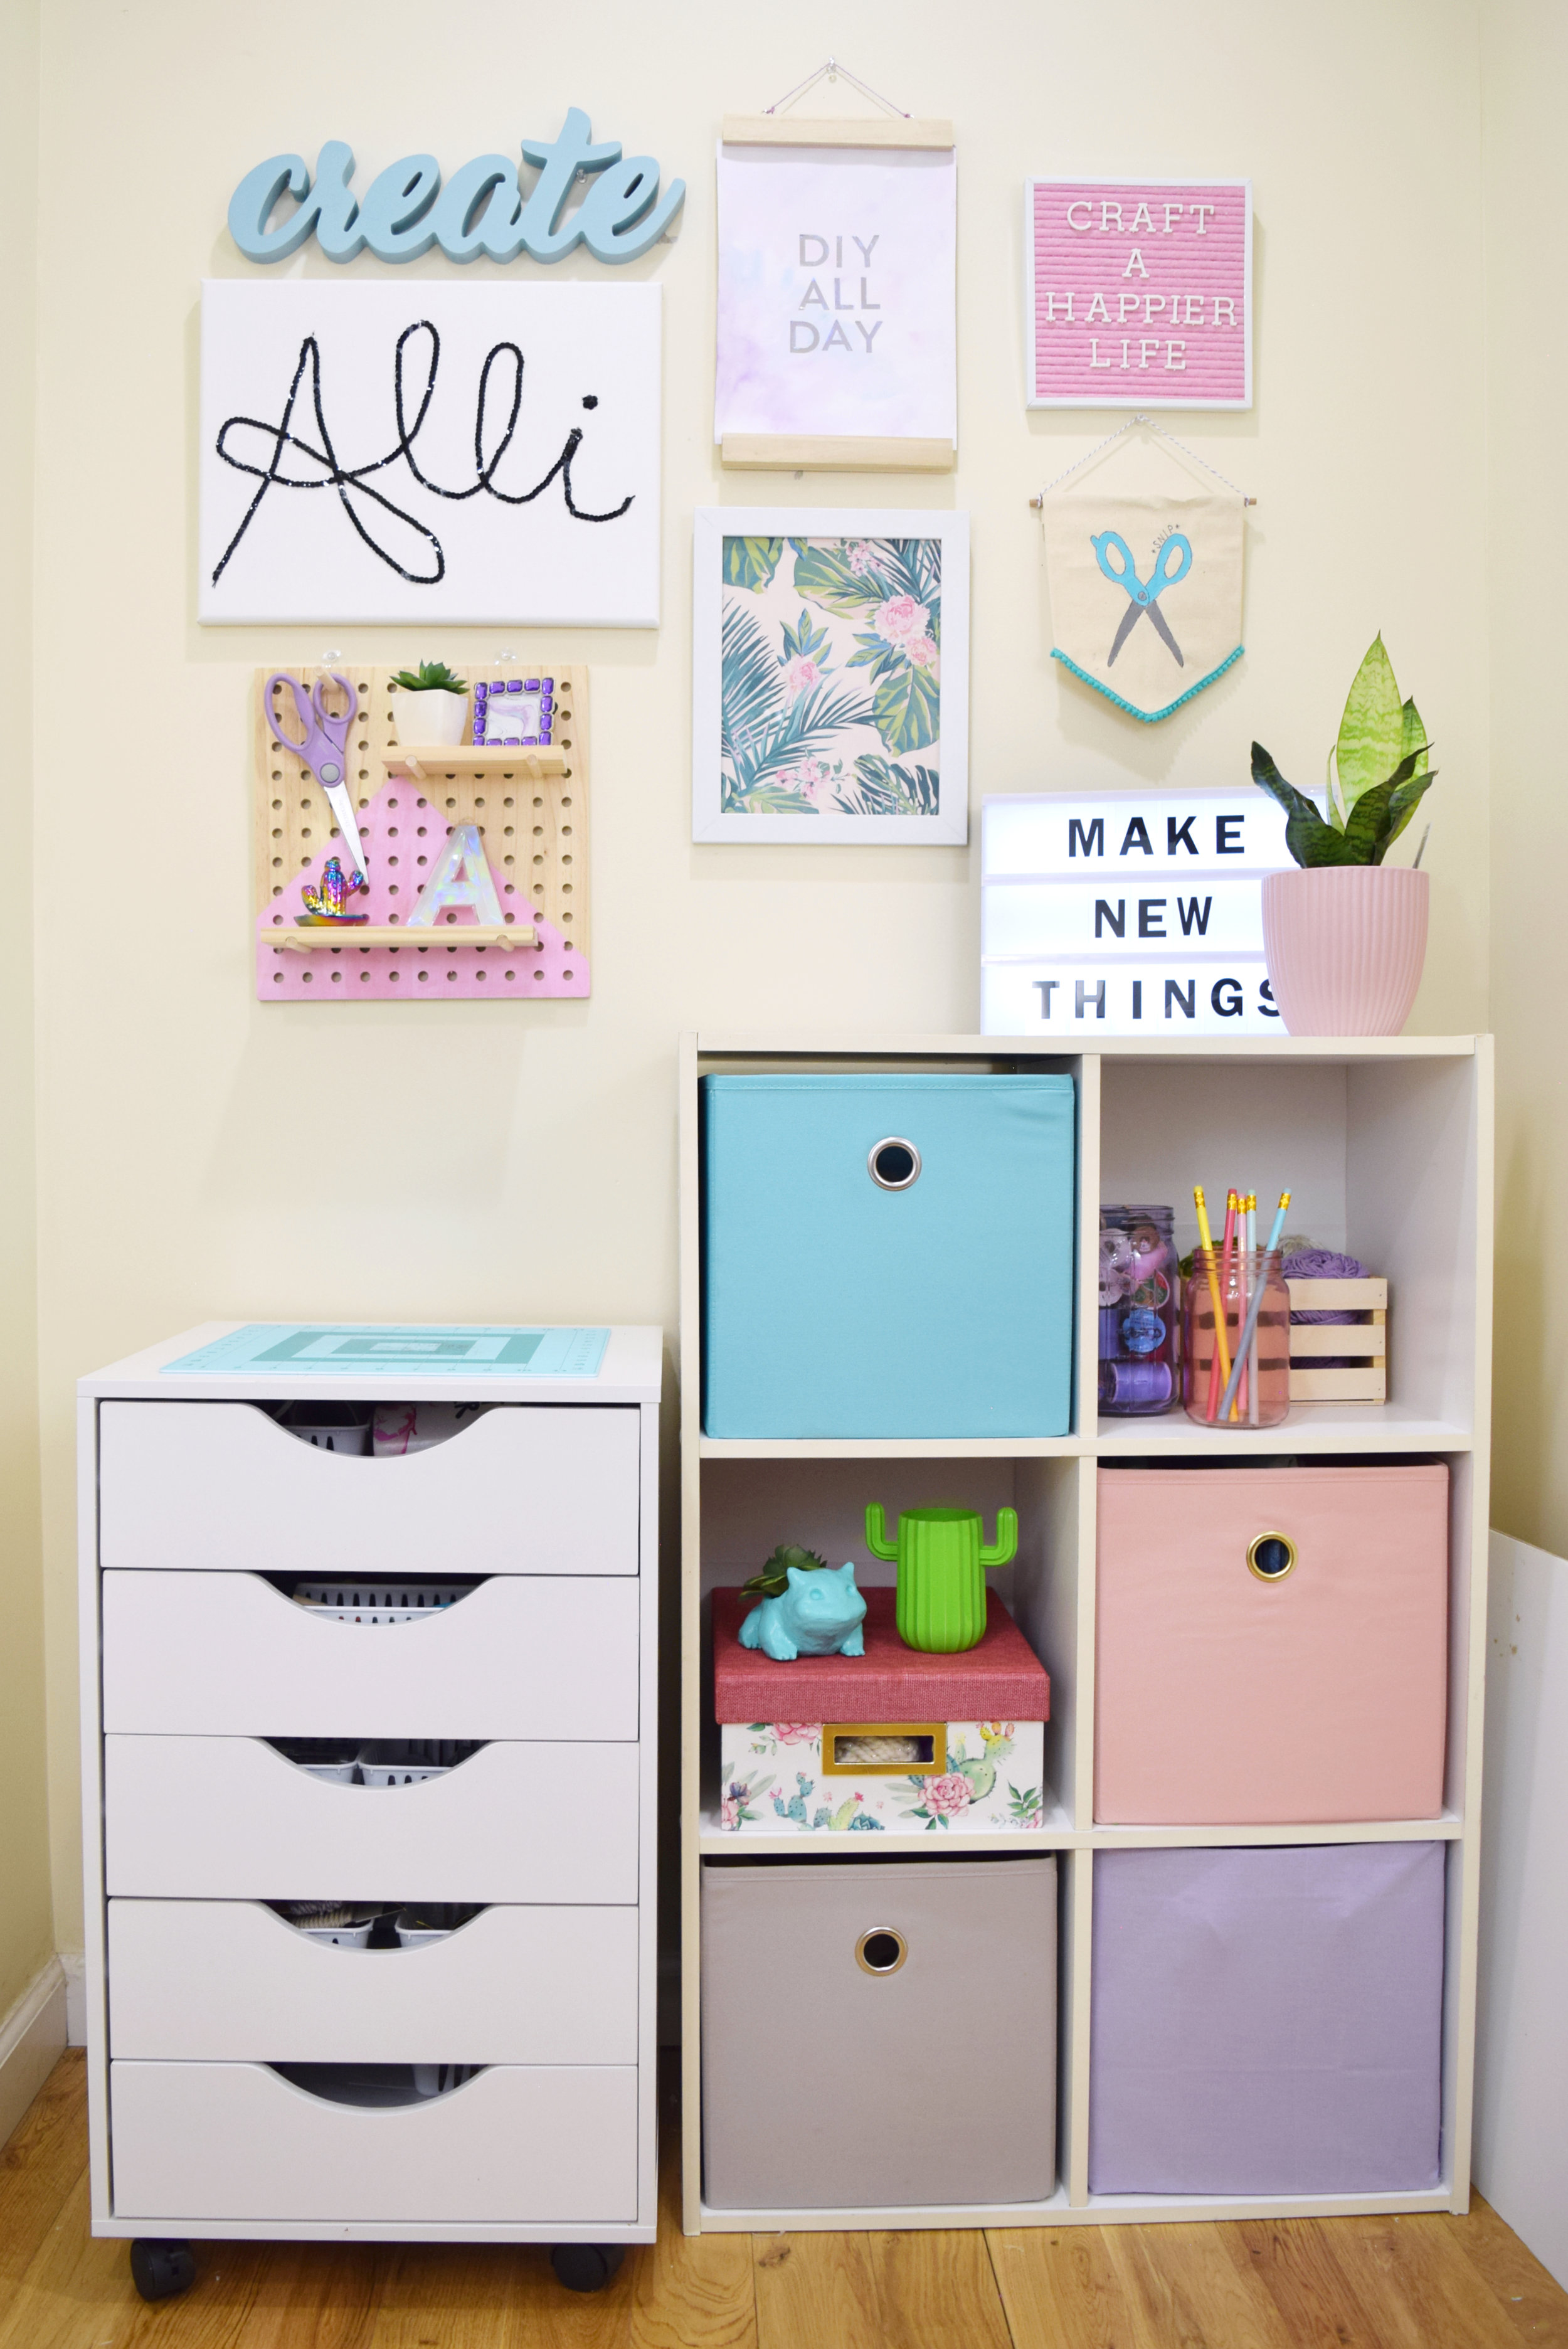 How to Create a Craft Area in a Small Space